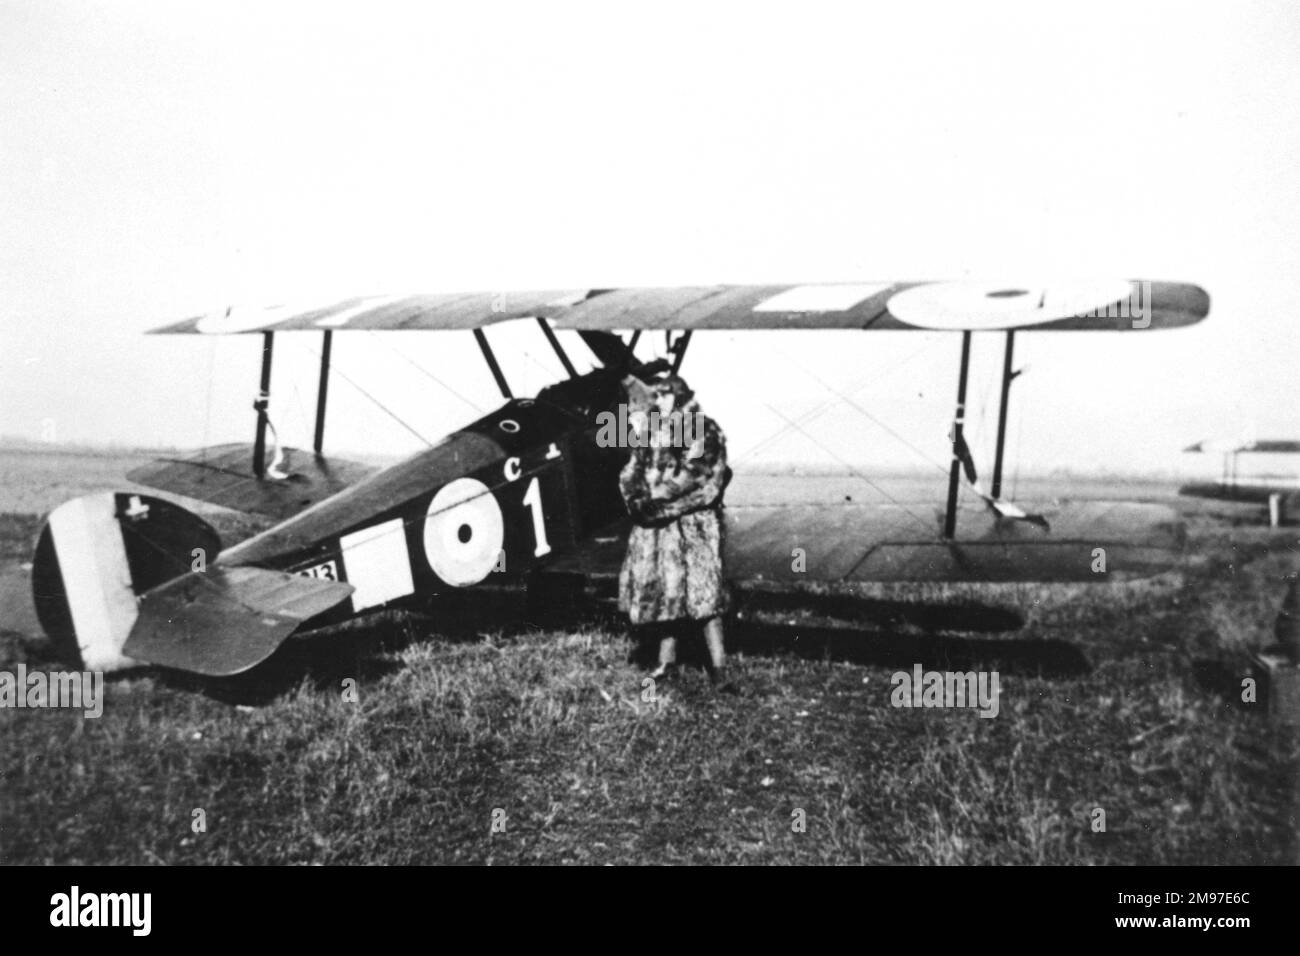 William George 'Billy' Barker (1894-1930), Canadian member of No. 9 Squadron, RFC, seen here wearing a fur coat, standing by his Sopwith Camel.  His confirmed victories totalled 50.  He received many awards, including the VC, the DSO, the MC and the Croix de Guerre. Stock Photo